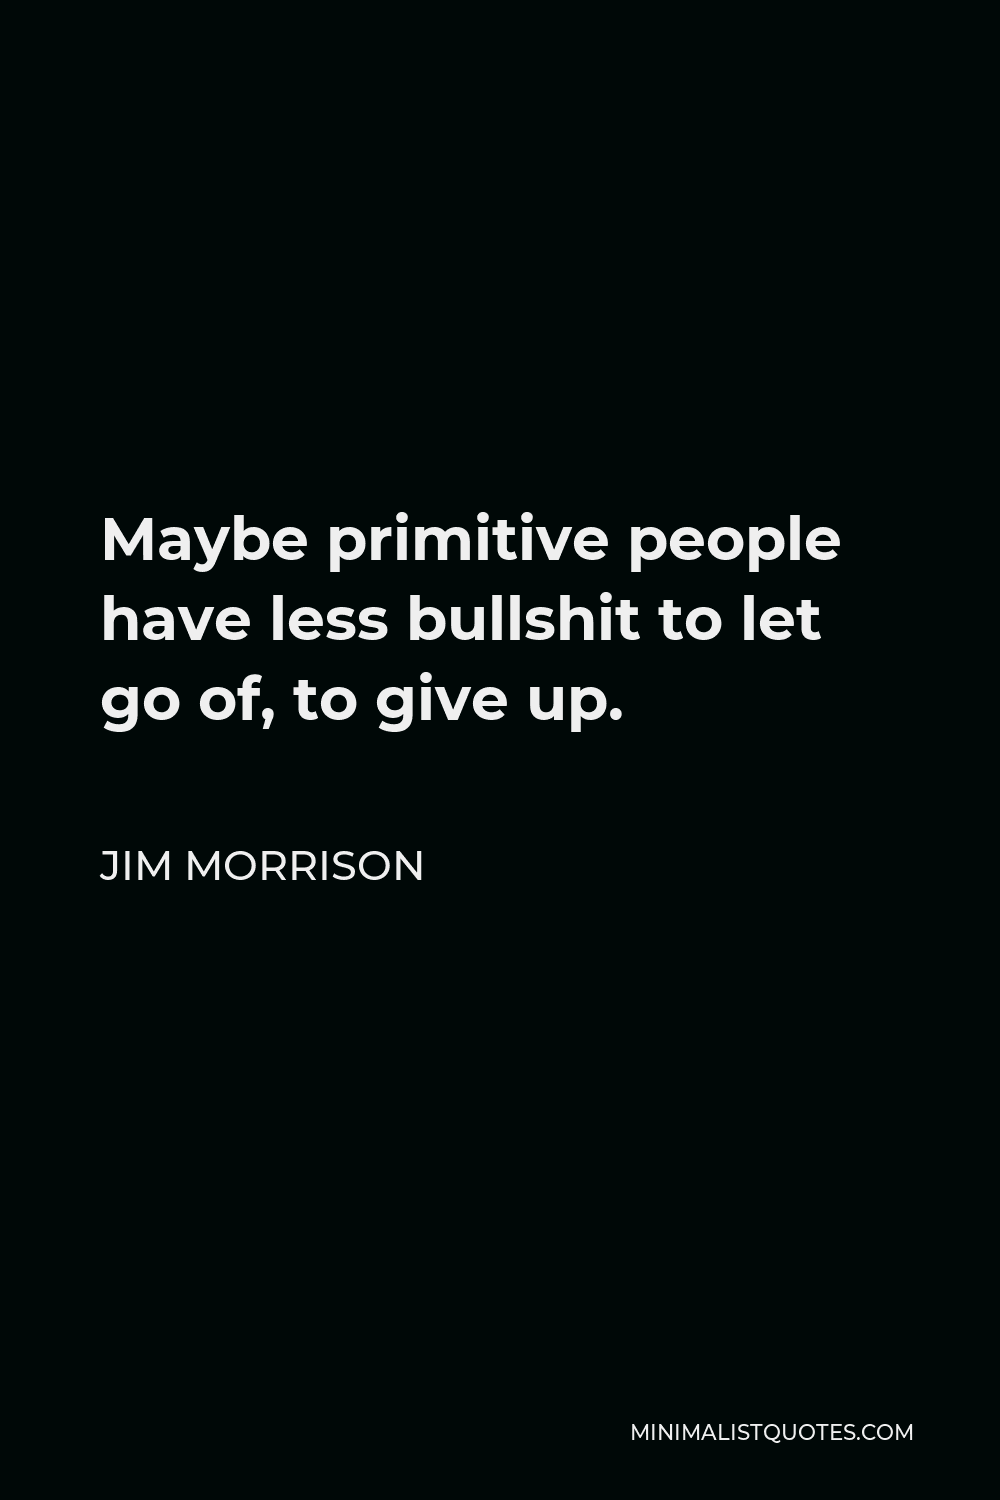 Jim Morrison Quote - Maybe primitive people have less bullshit to let go of, to give up.